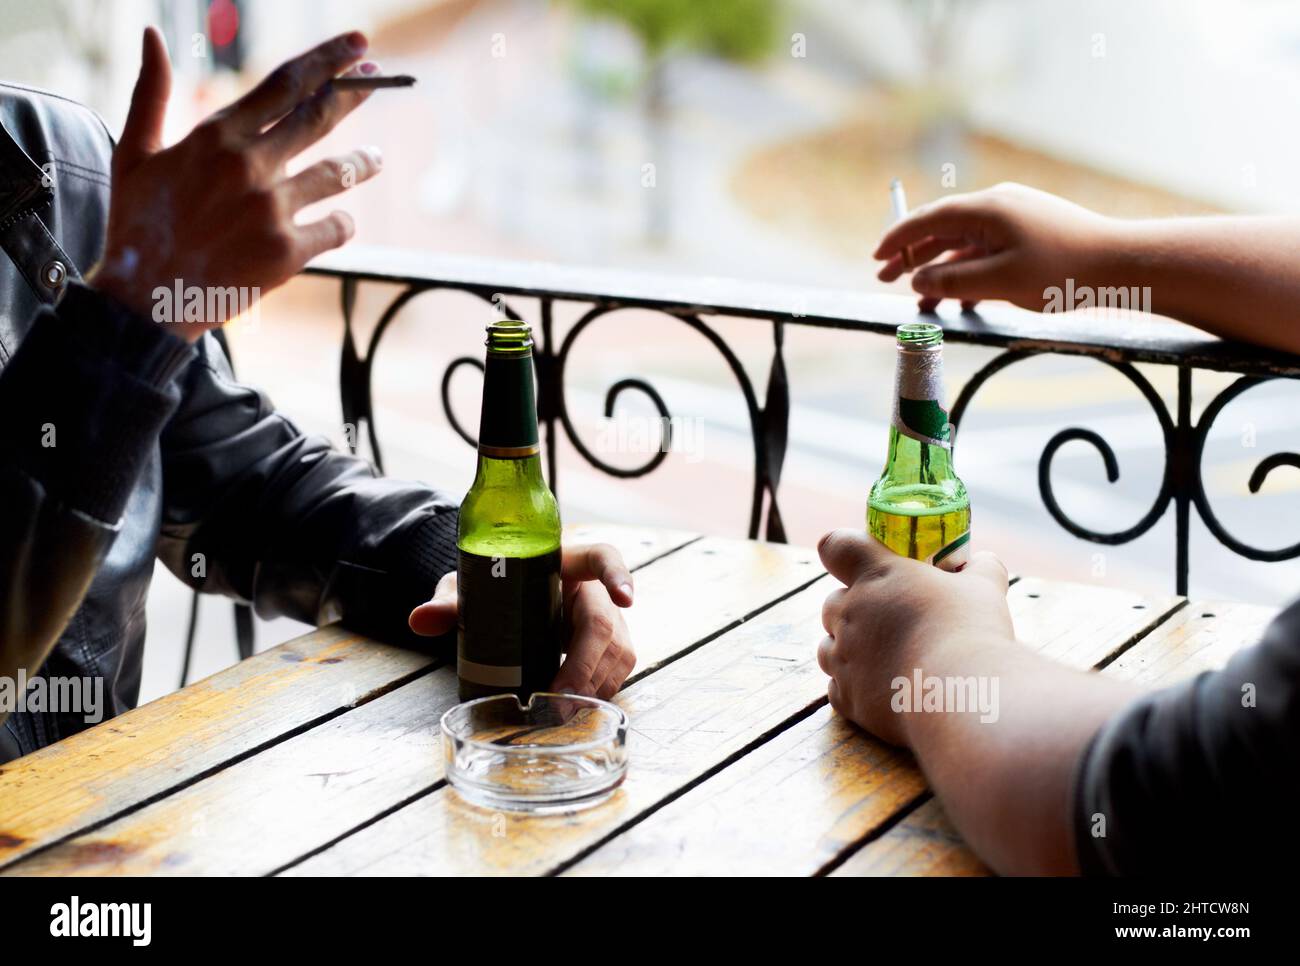 Sharing bad habits.... A cropped image of two young men smoking with beers in front of them. Stock Photo